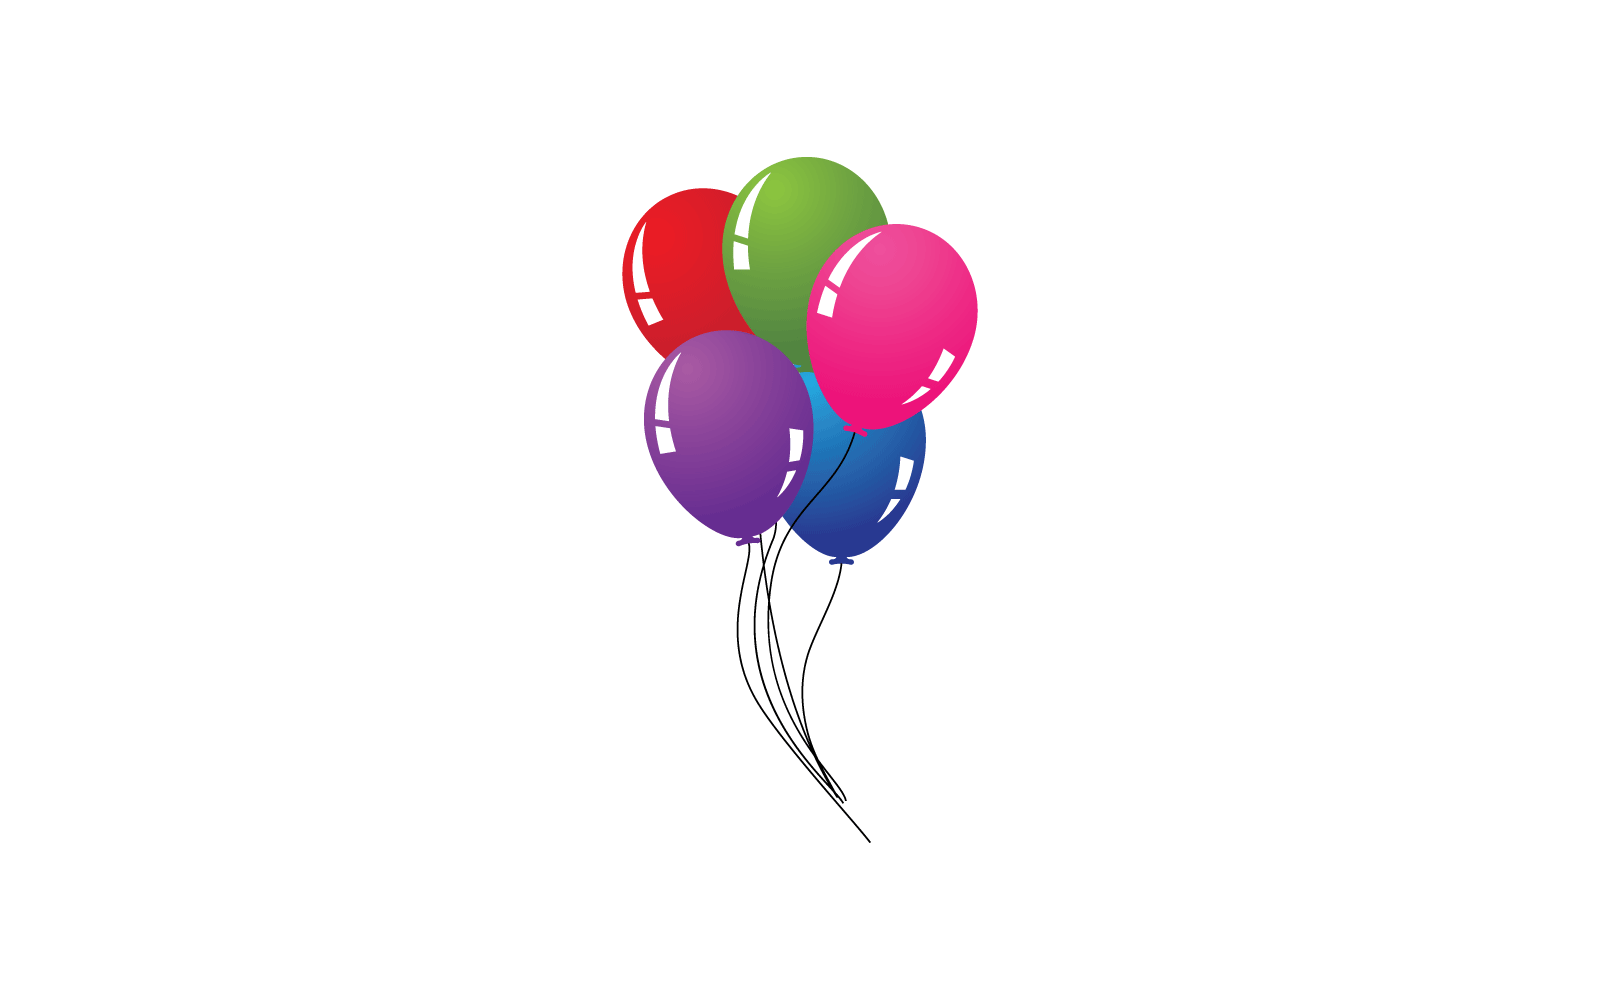 Realistic balloon illustration on white background template